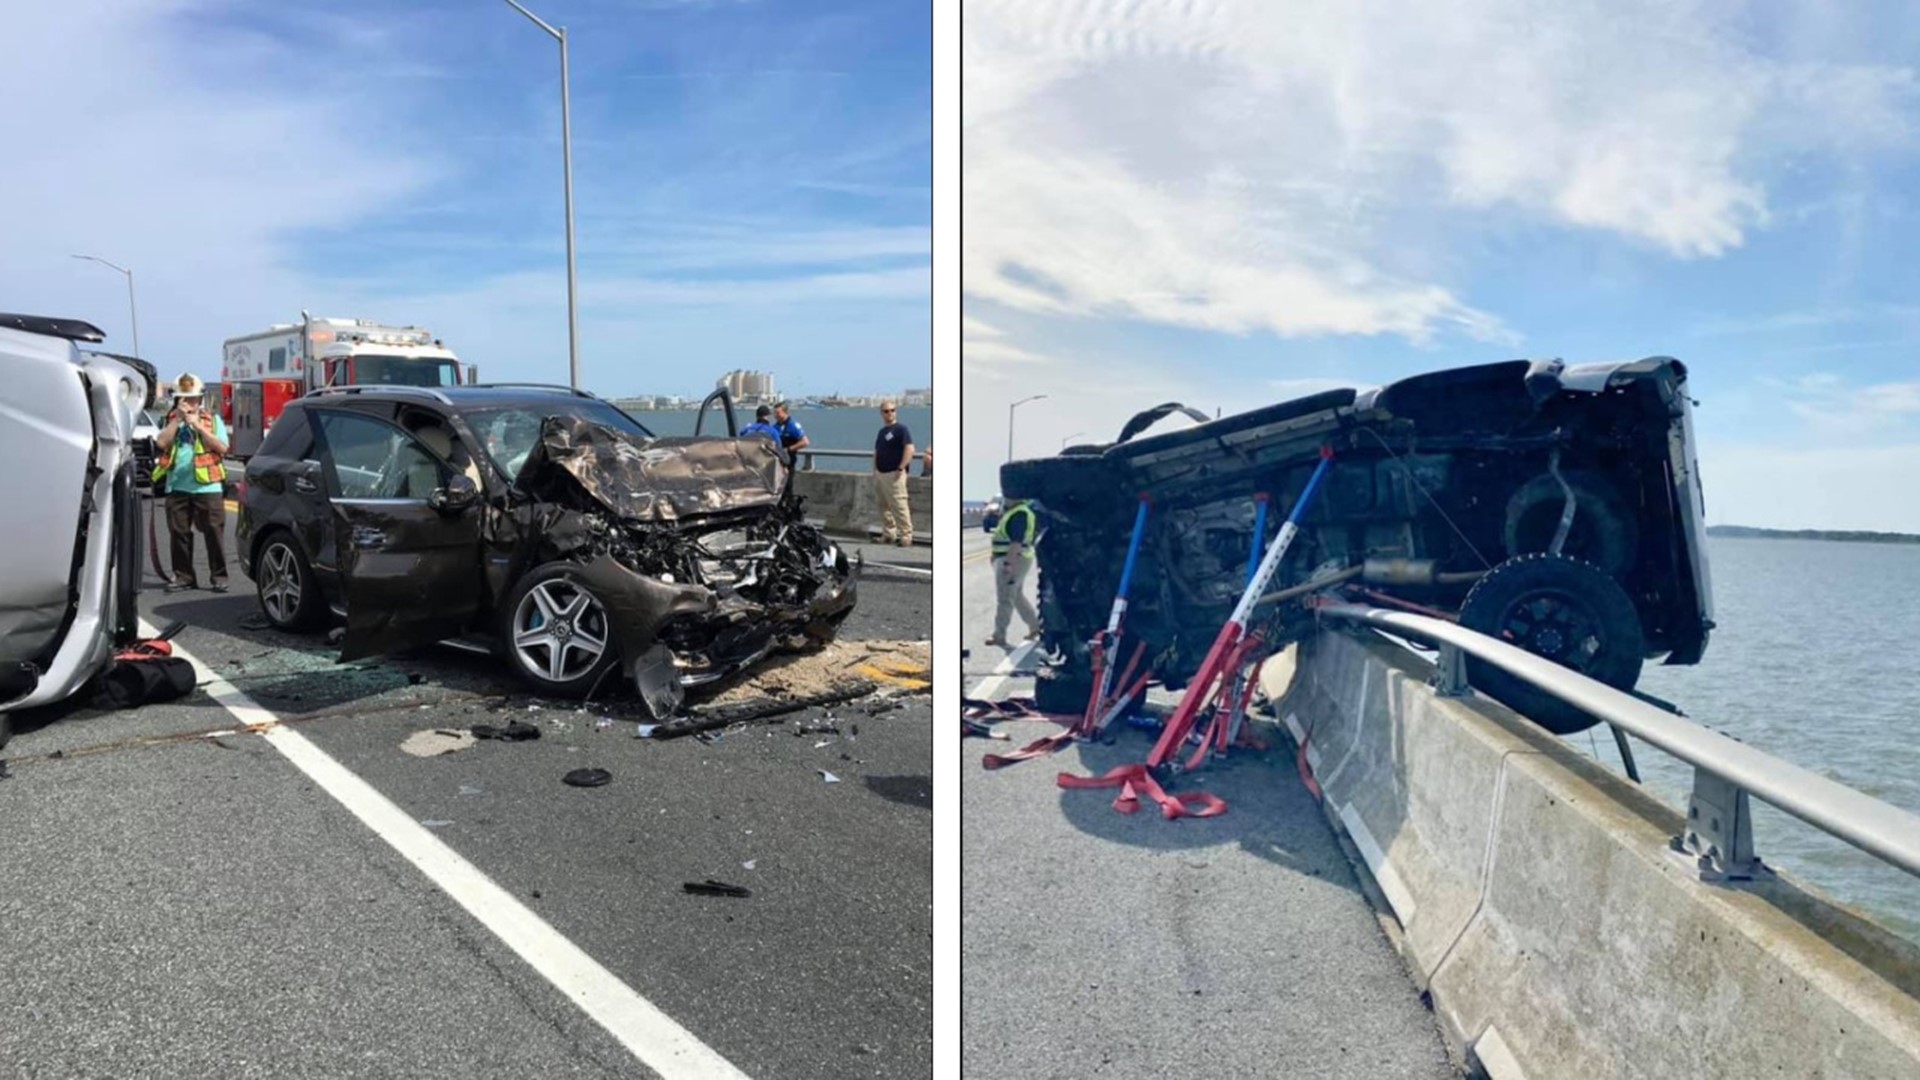 Eight people, including a toddler, were hospitalized Sunday after a vehicle crash on the Route 90 bridge in Ocean City.